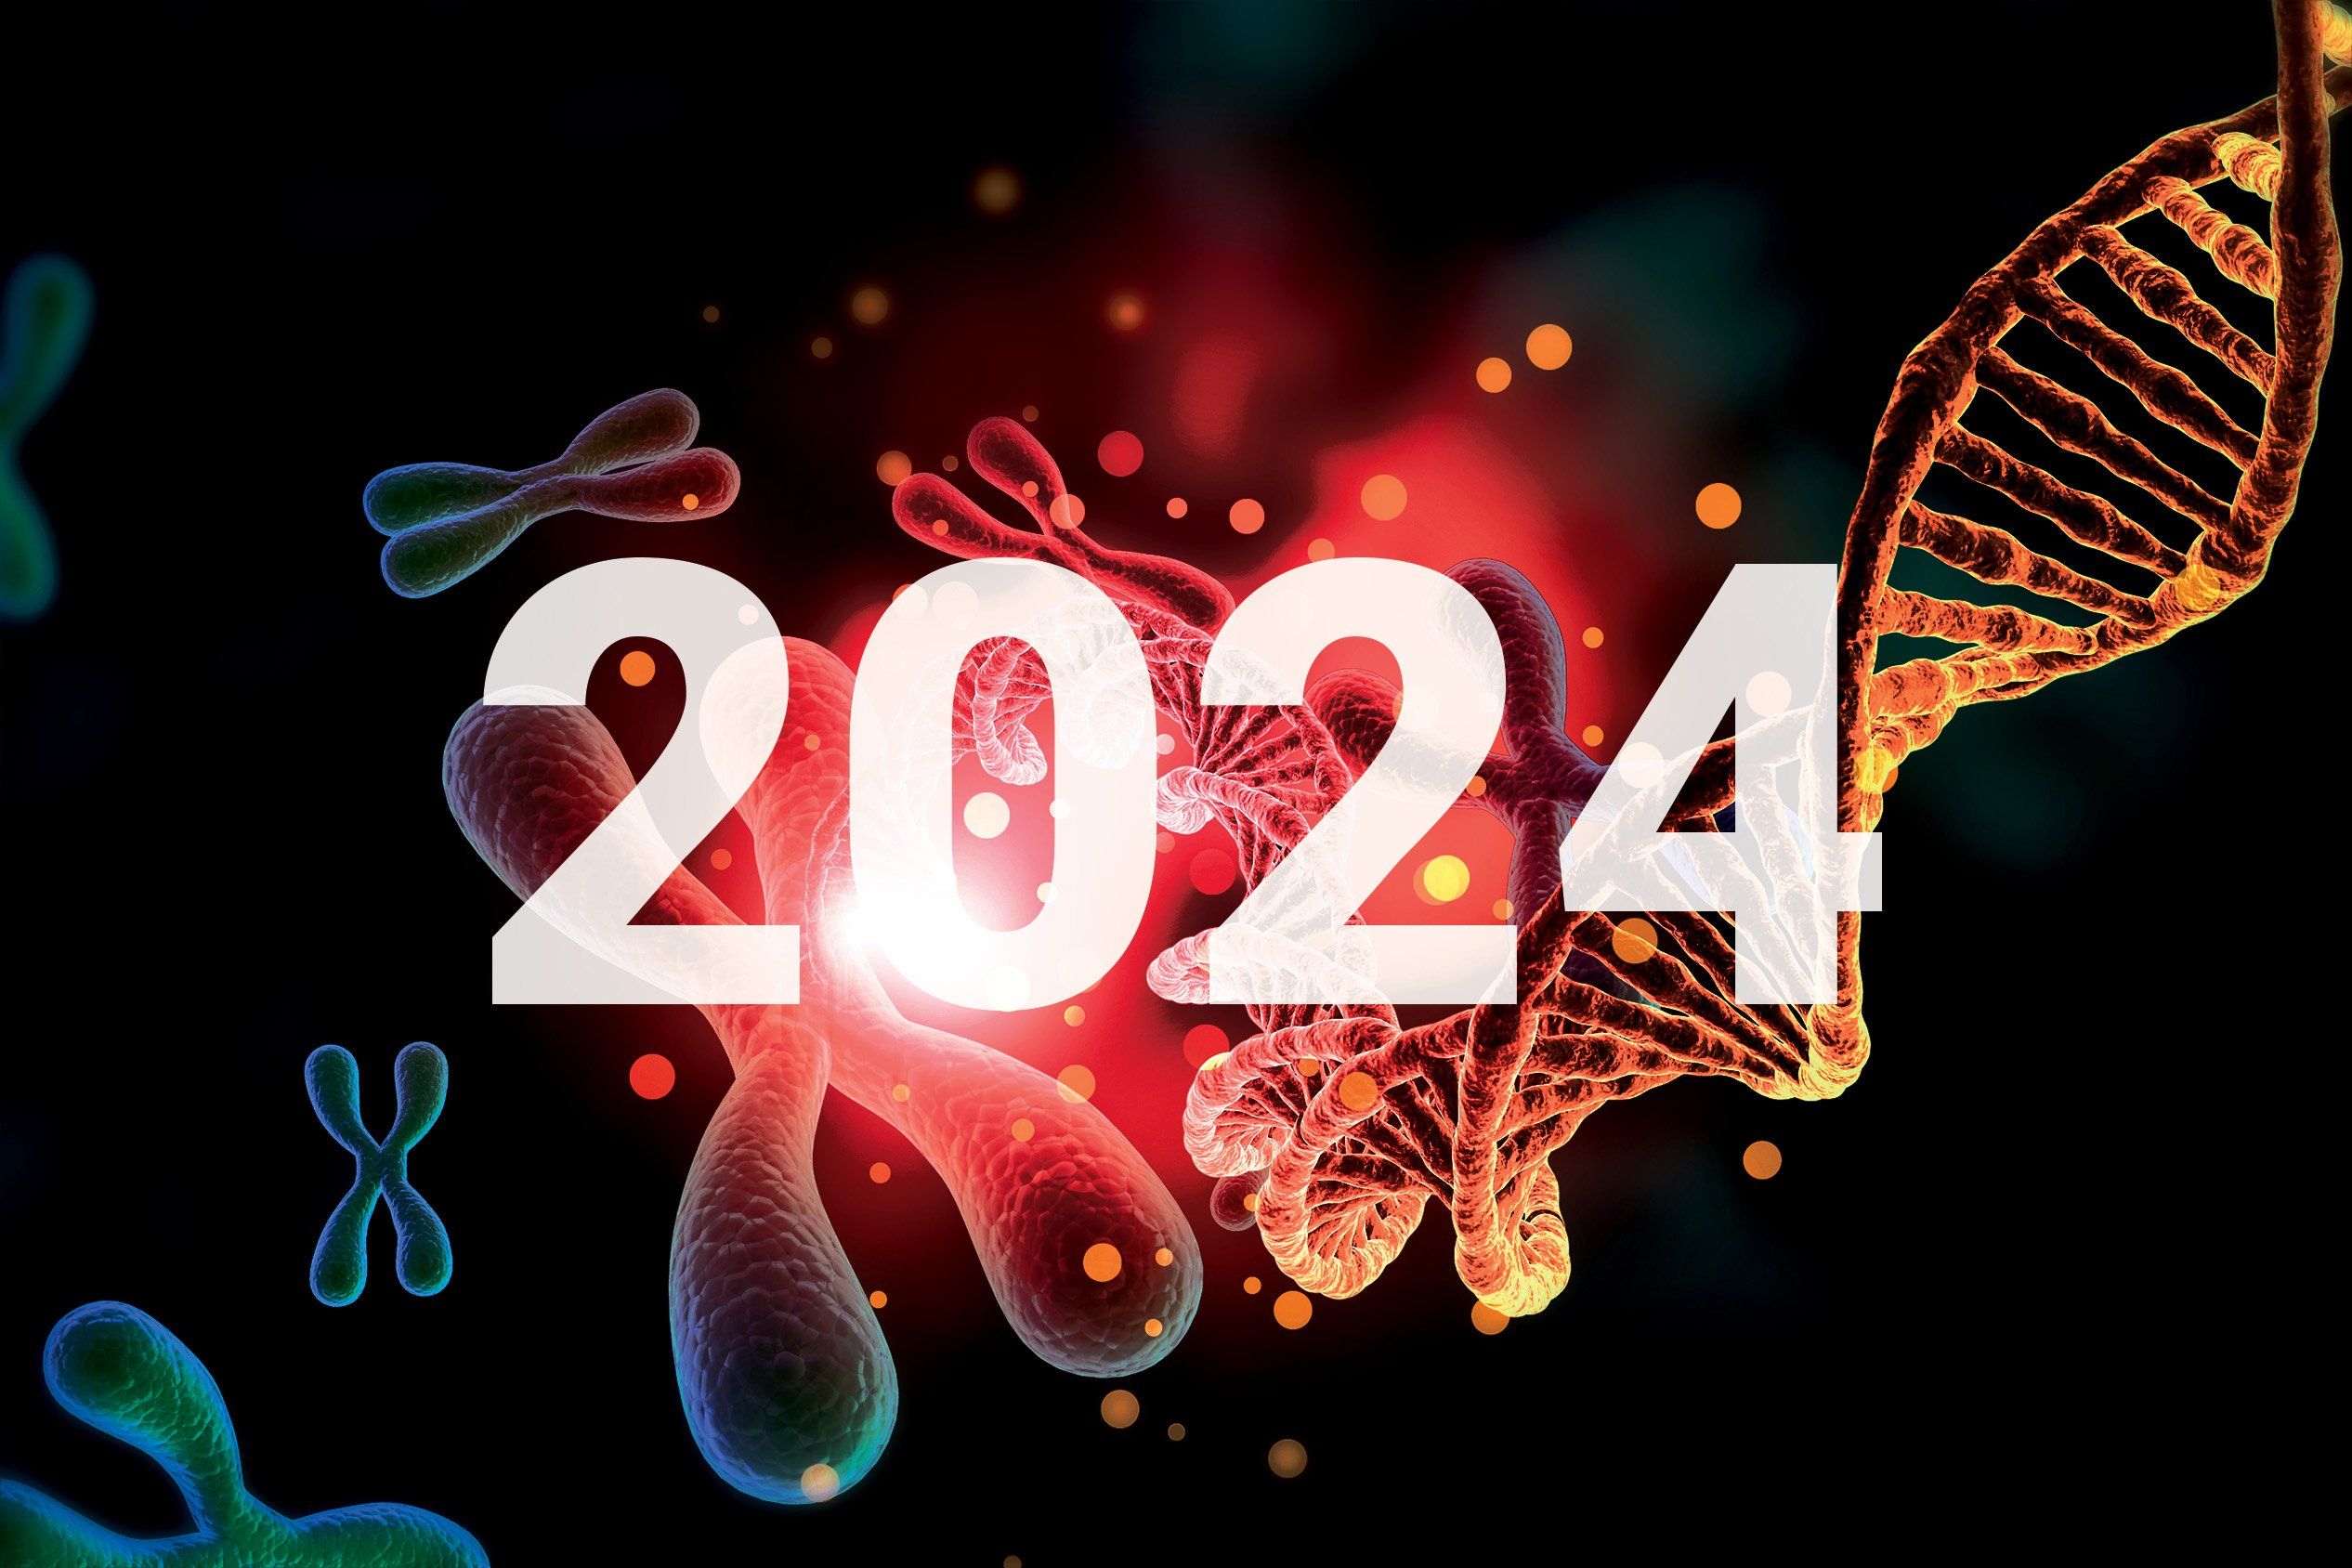 Genes and chromosomes with "2024" overlay.